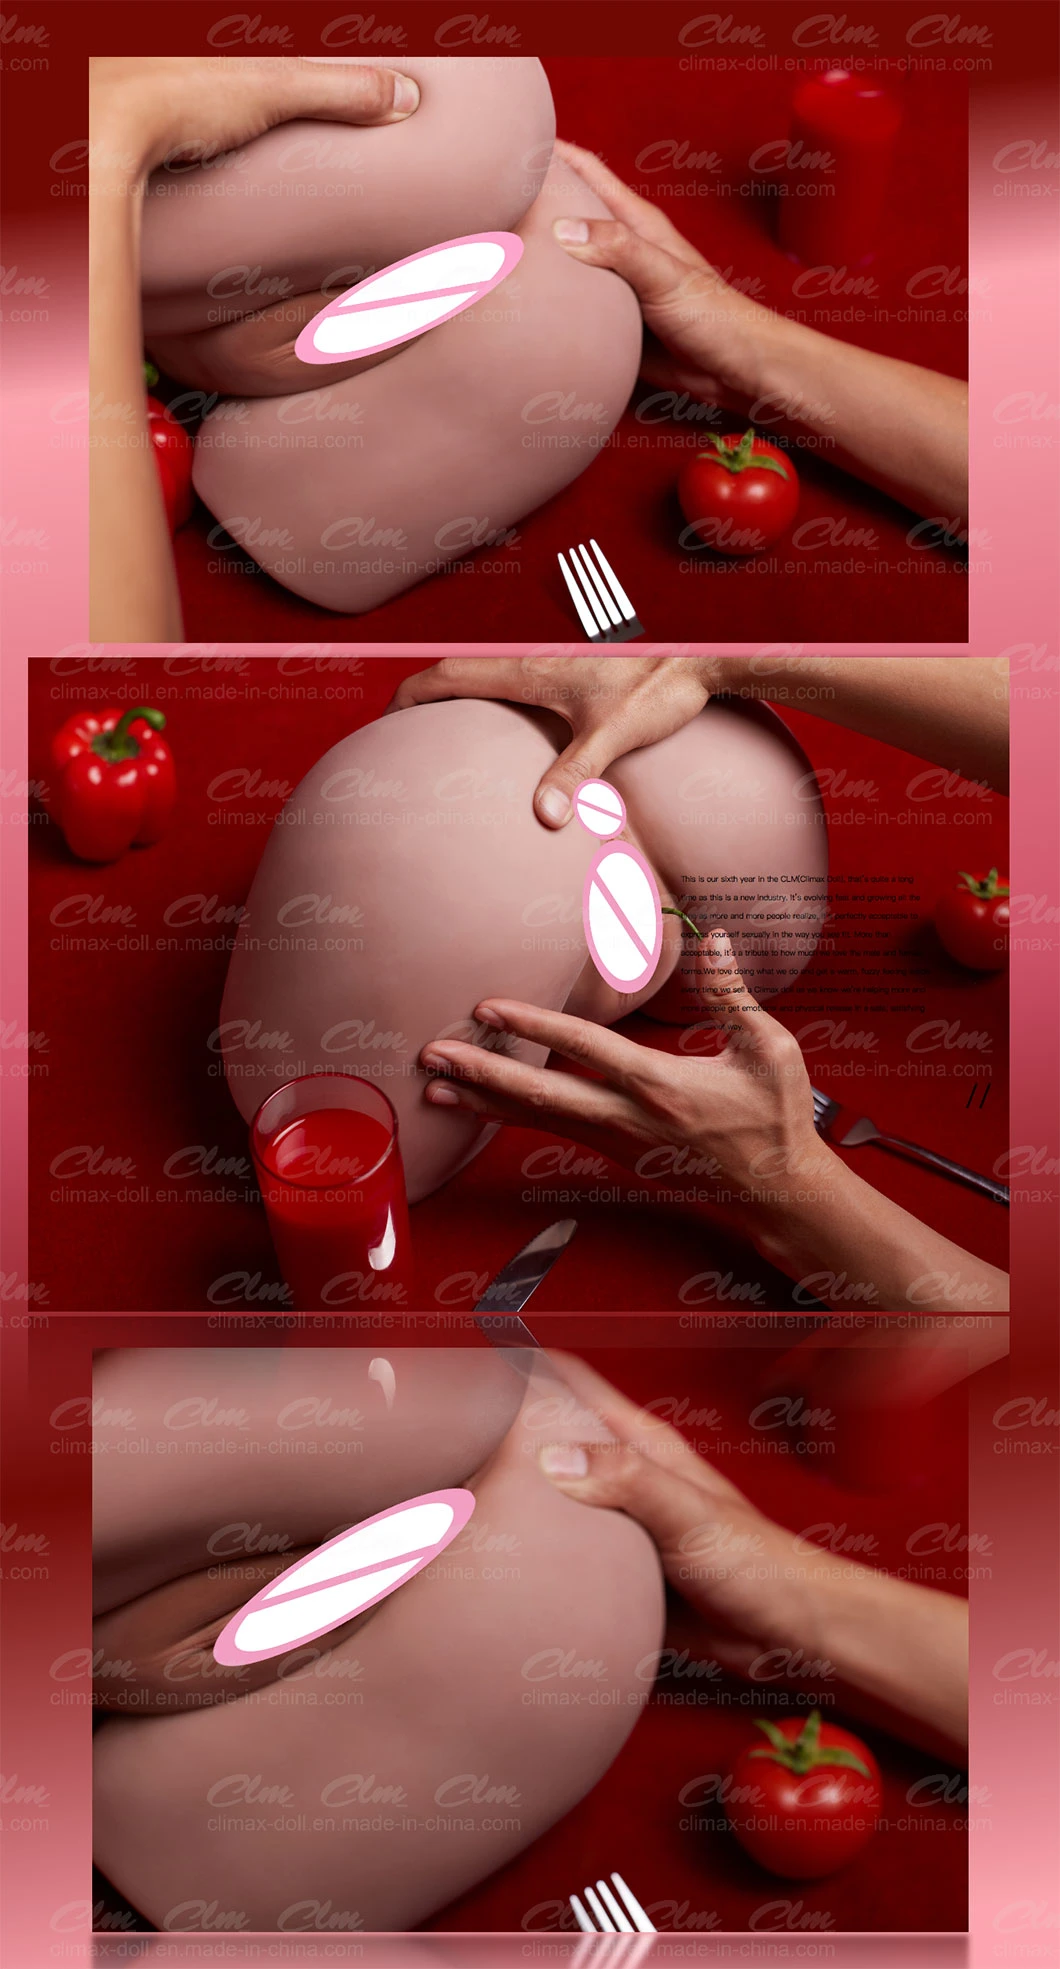 Clm (Climax Doll) Labia Anal Entrance Fold Structure Authenticity and Naturalness Sex Toy Adult Product